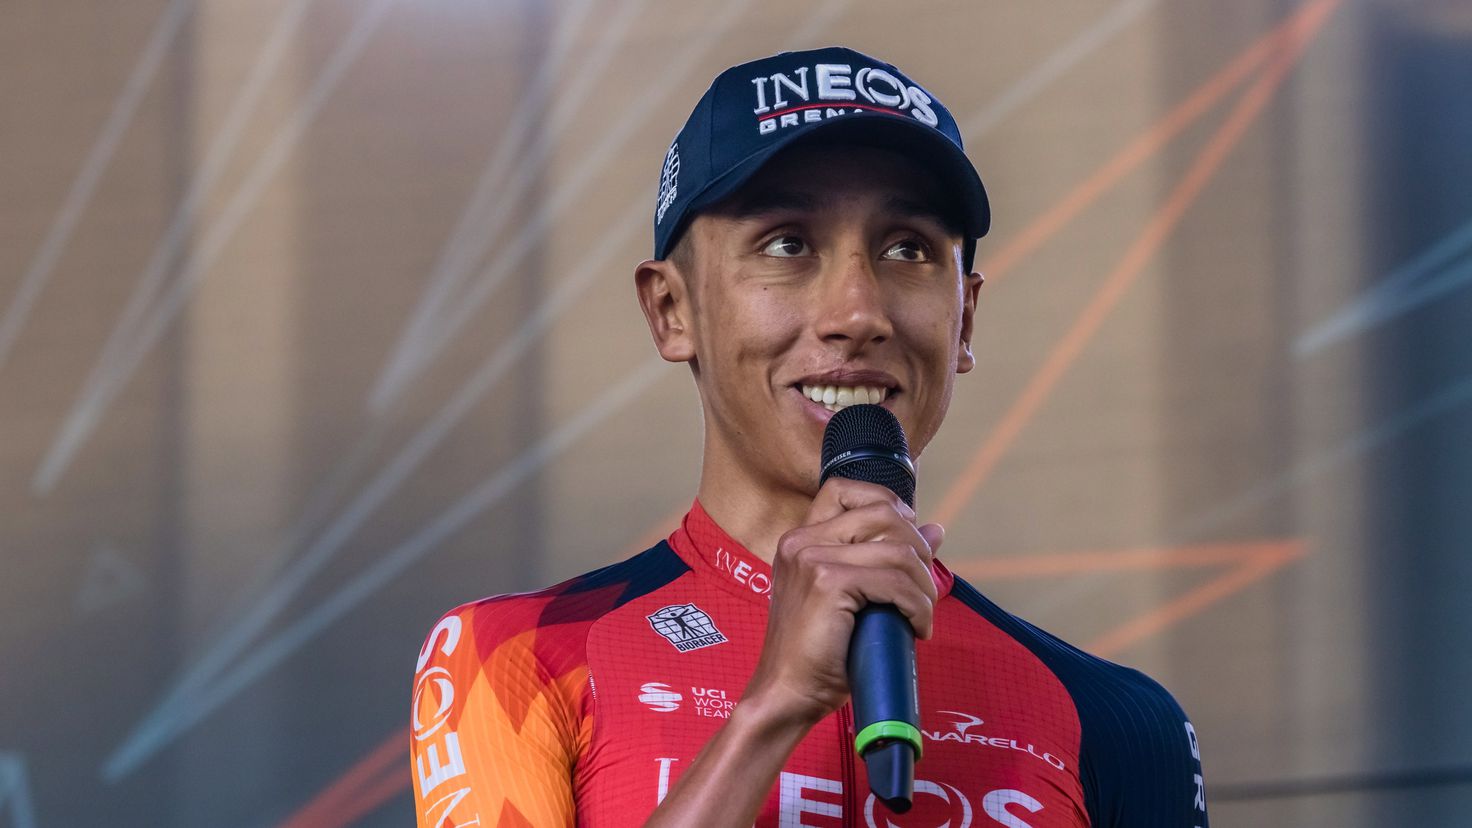 Promise of Italian cycling has Egan Bernal as a reference
